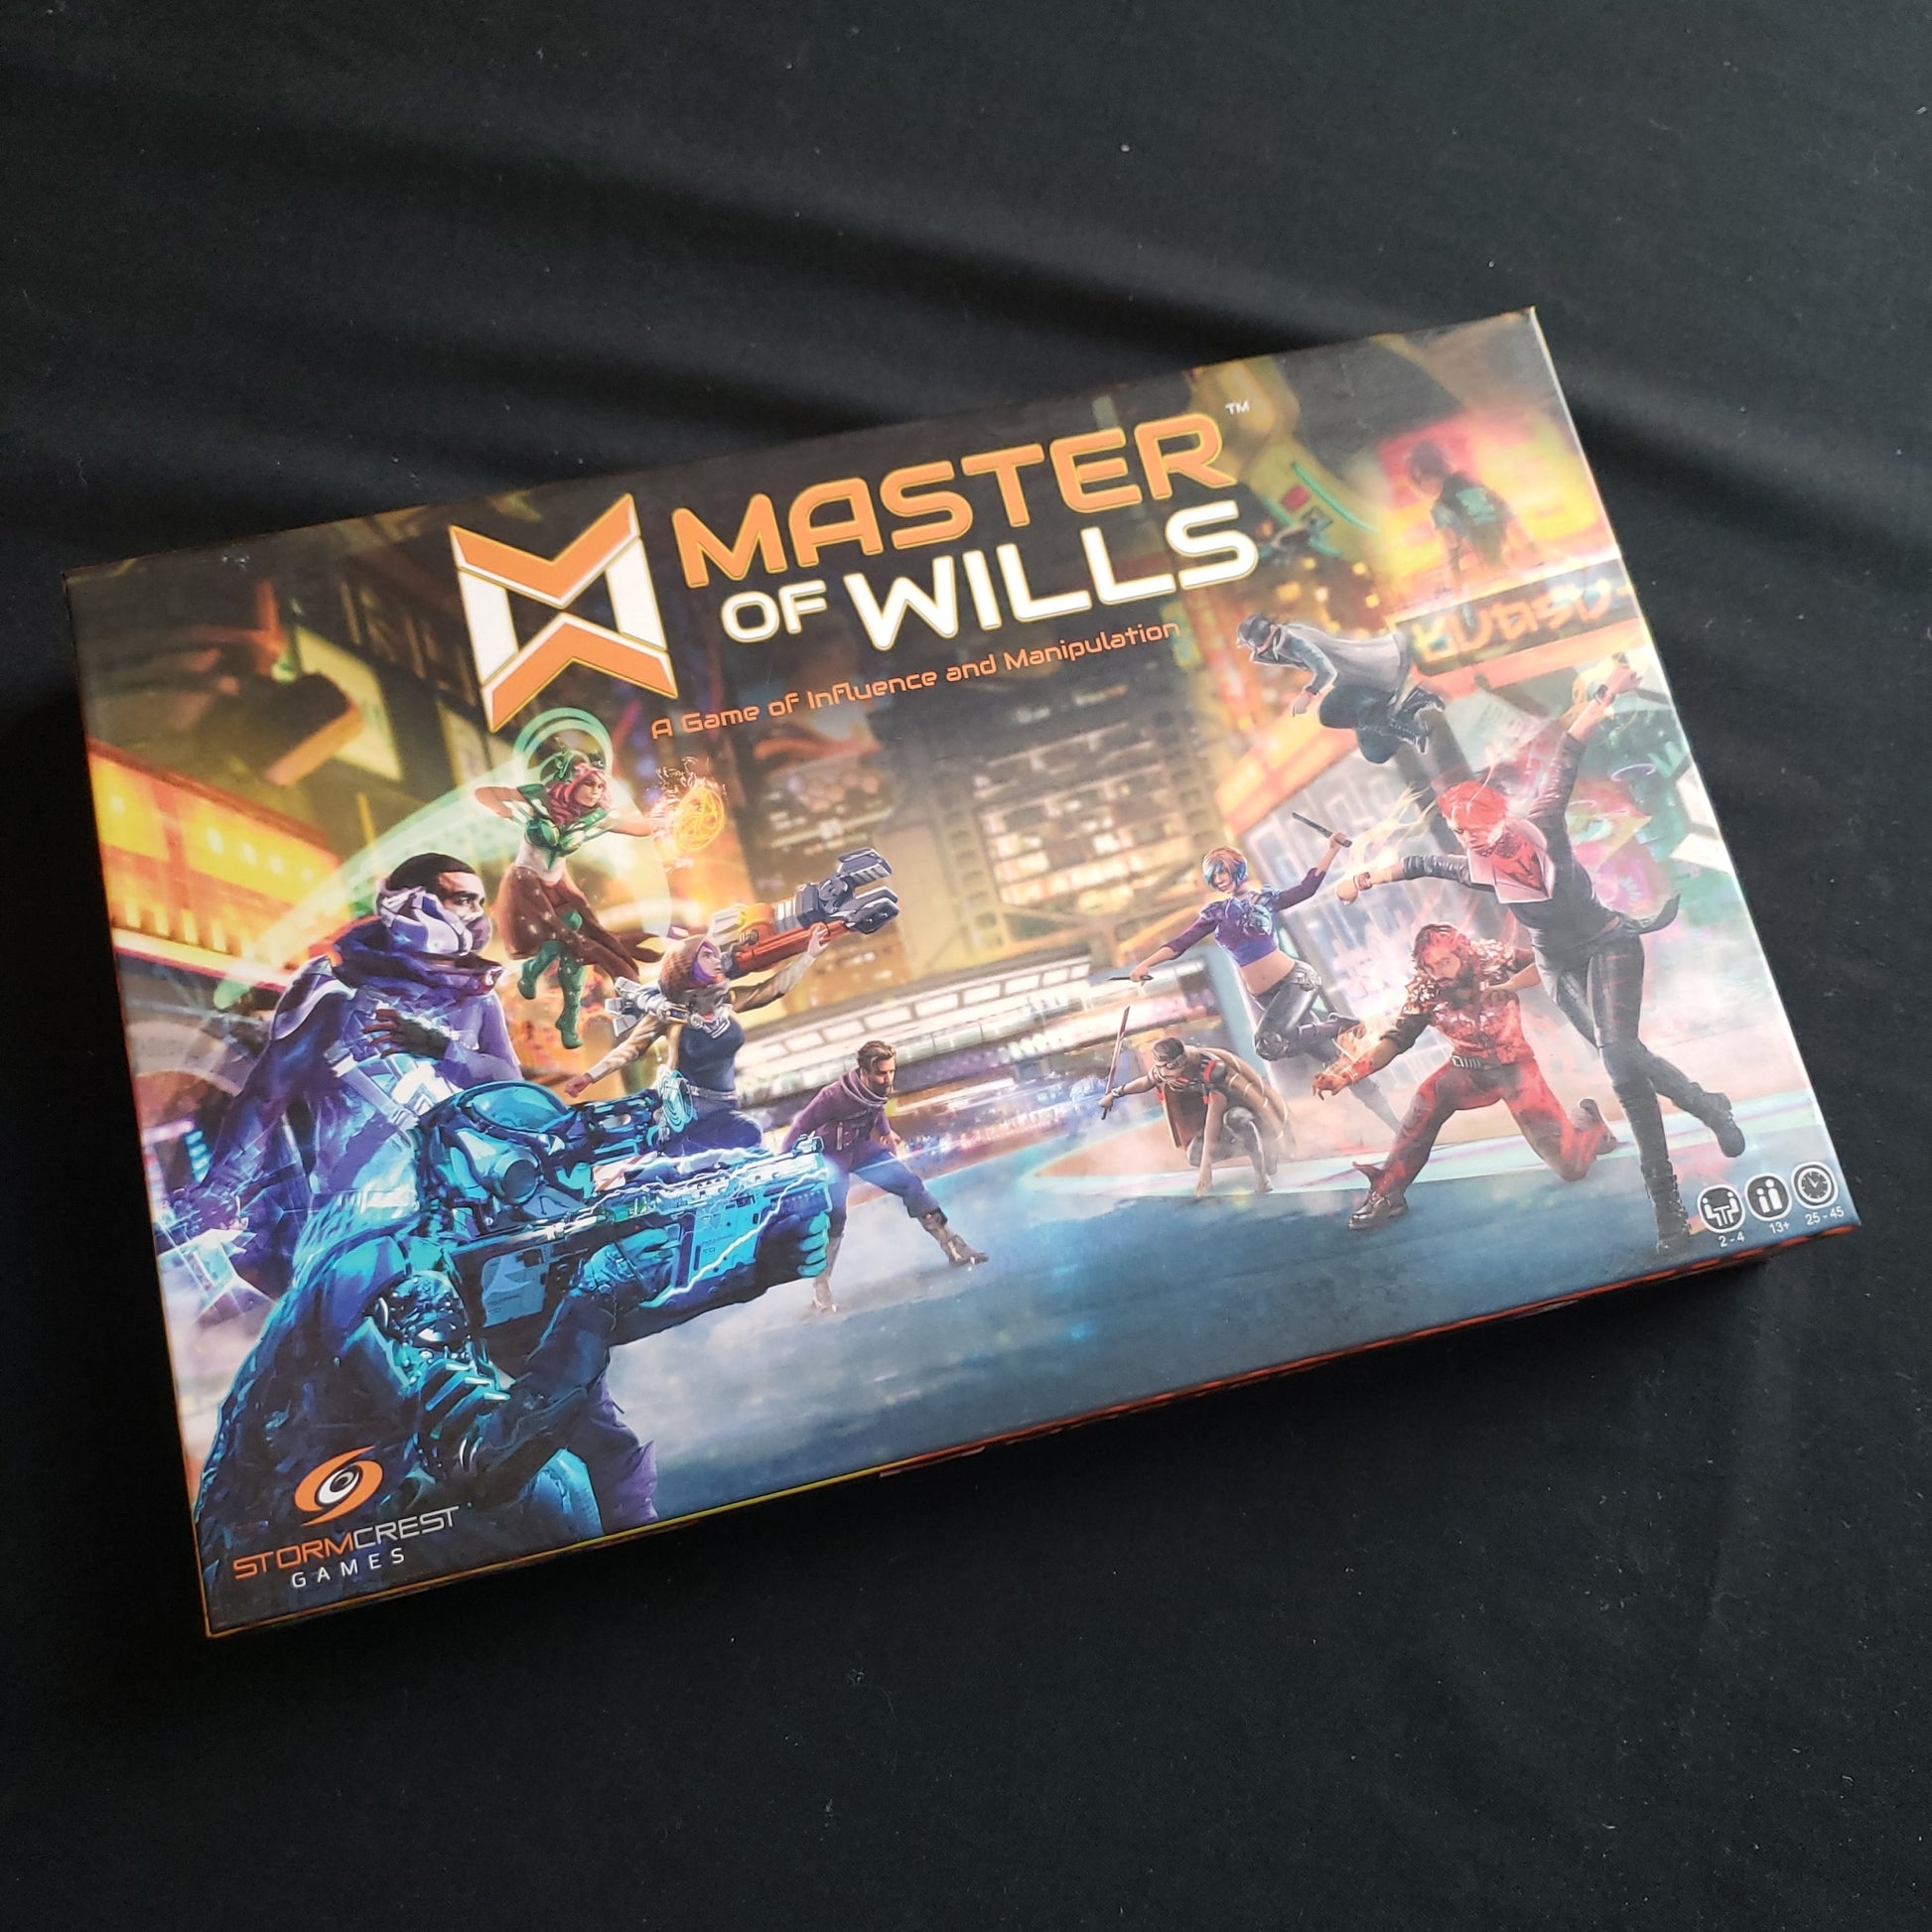 Image shows the front cover of the box of the Master Of Wills board game